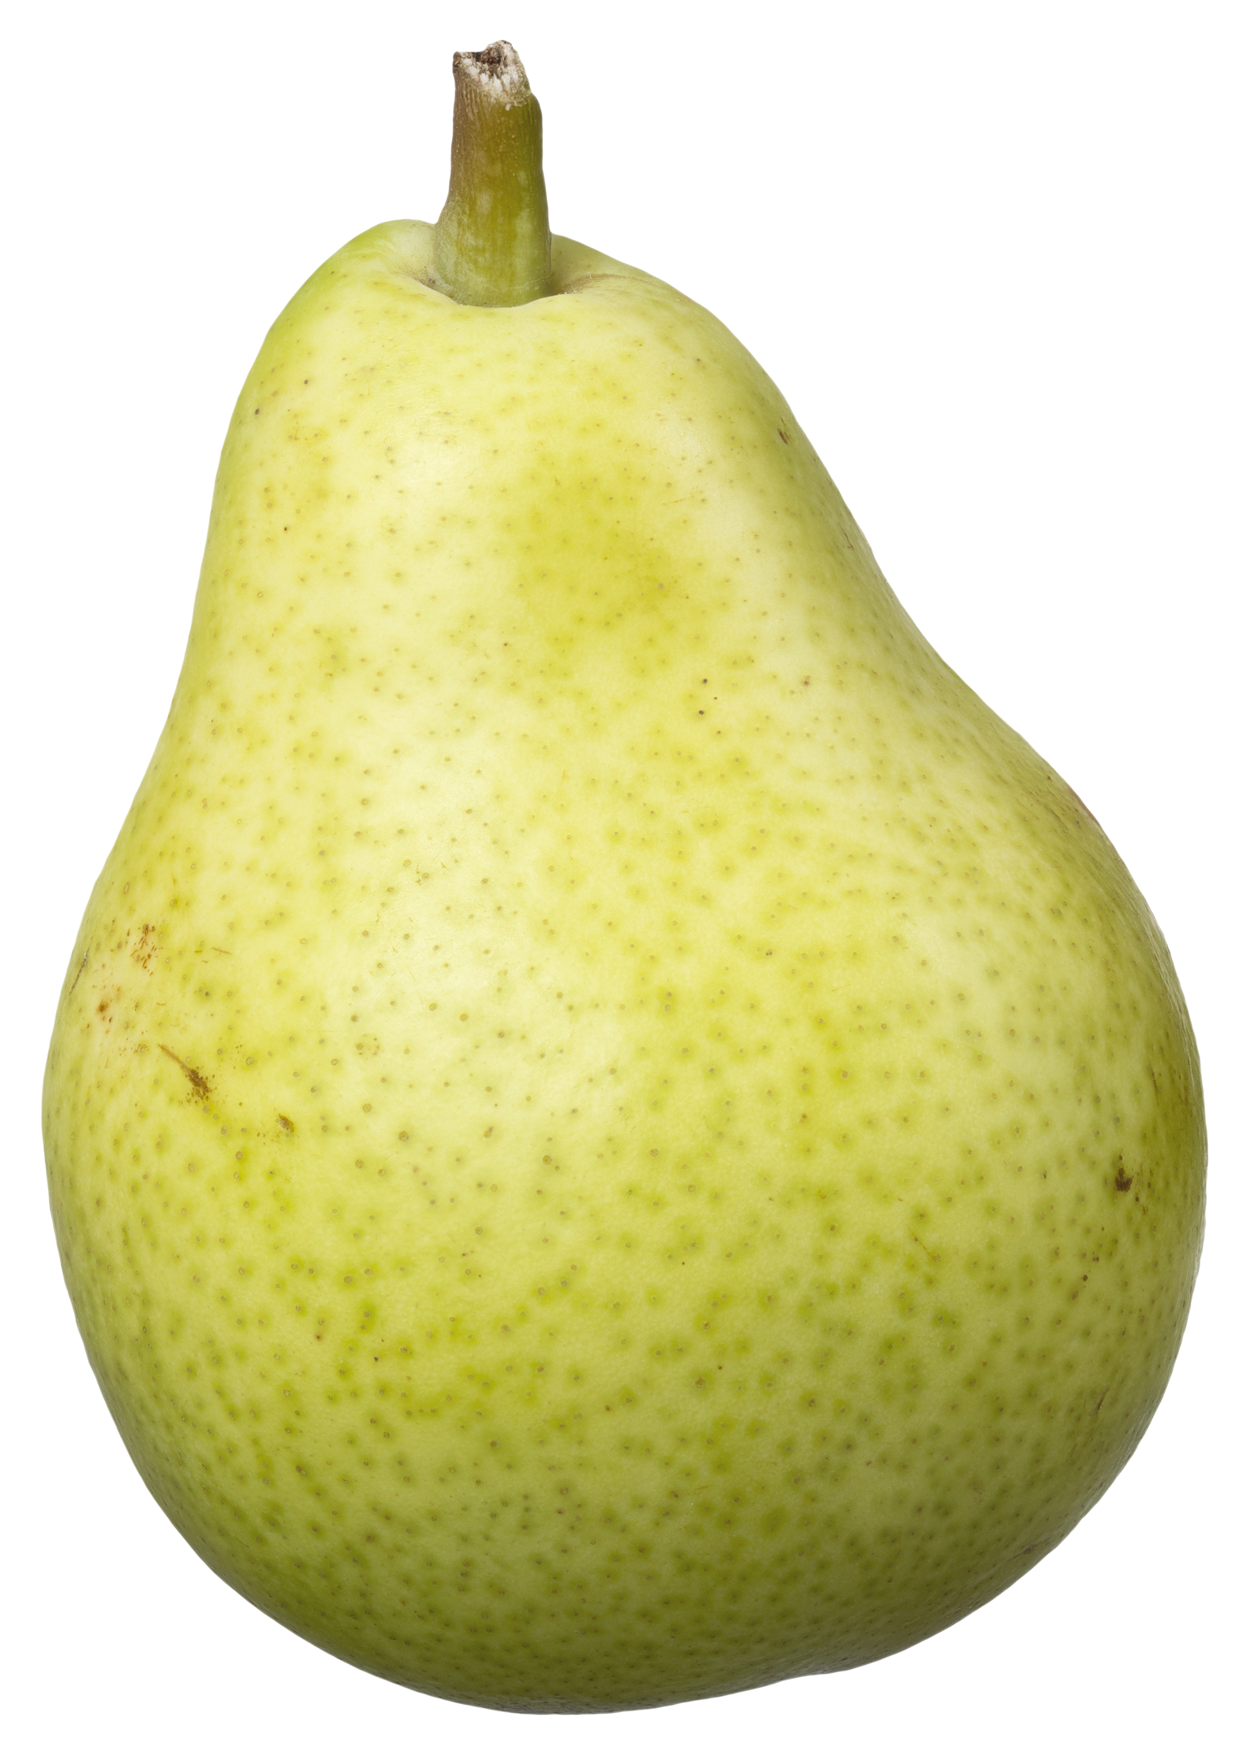 Pear Fruit Png Transparent Image   Pear Png - Pear, Transparent background PNG HD thumbnail